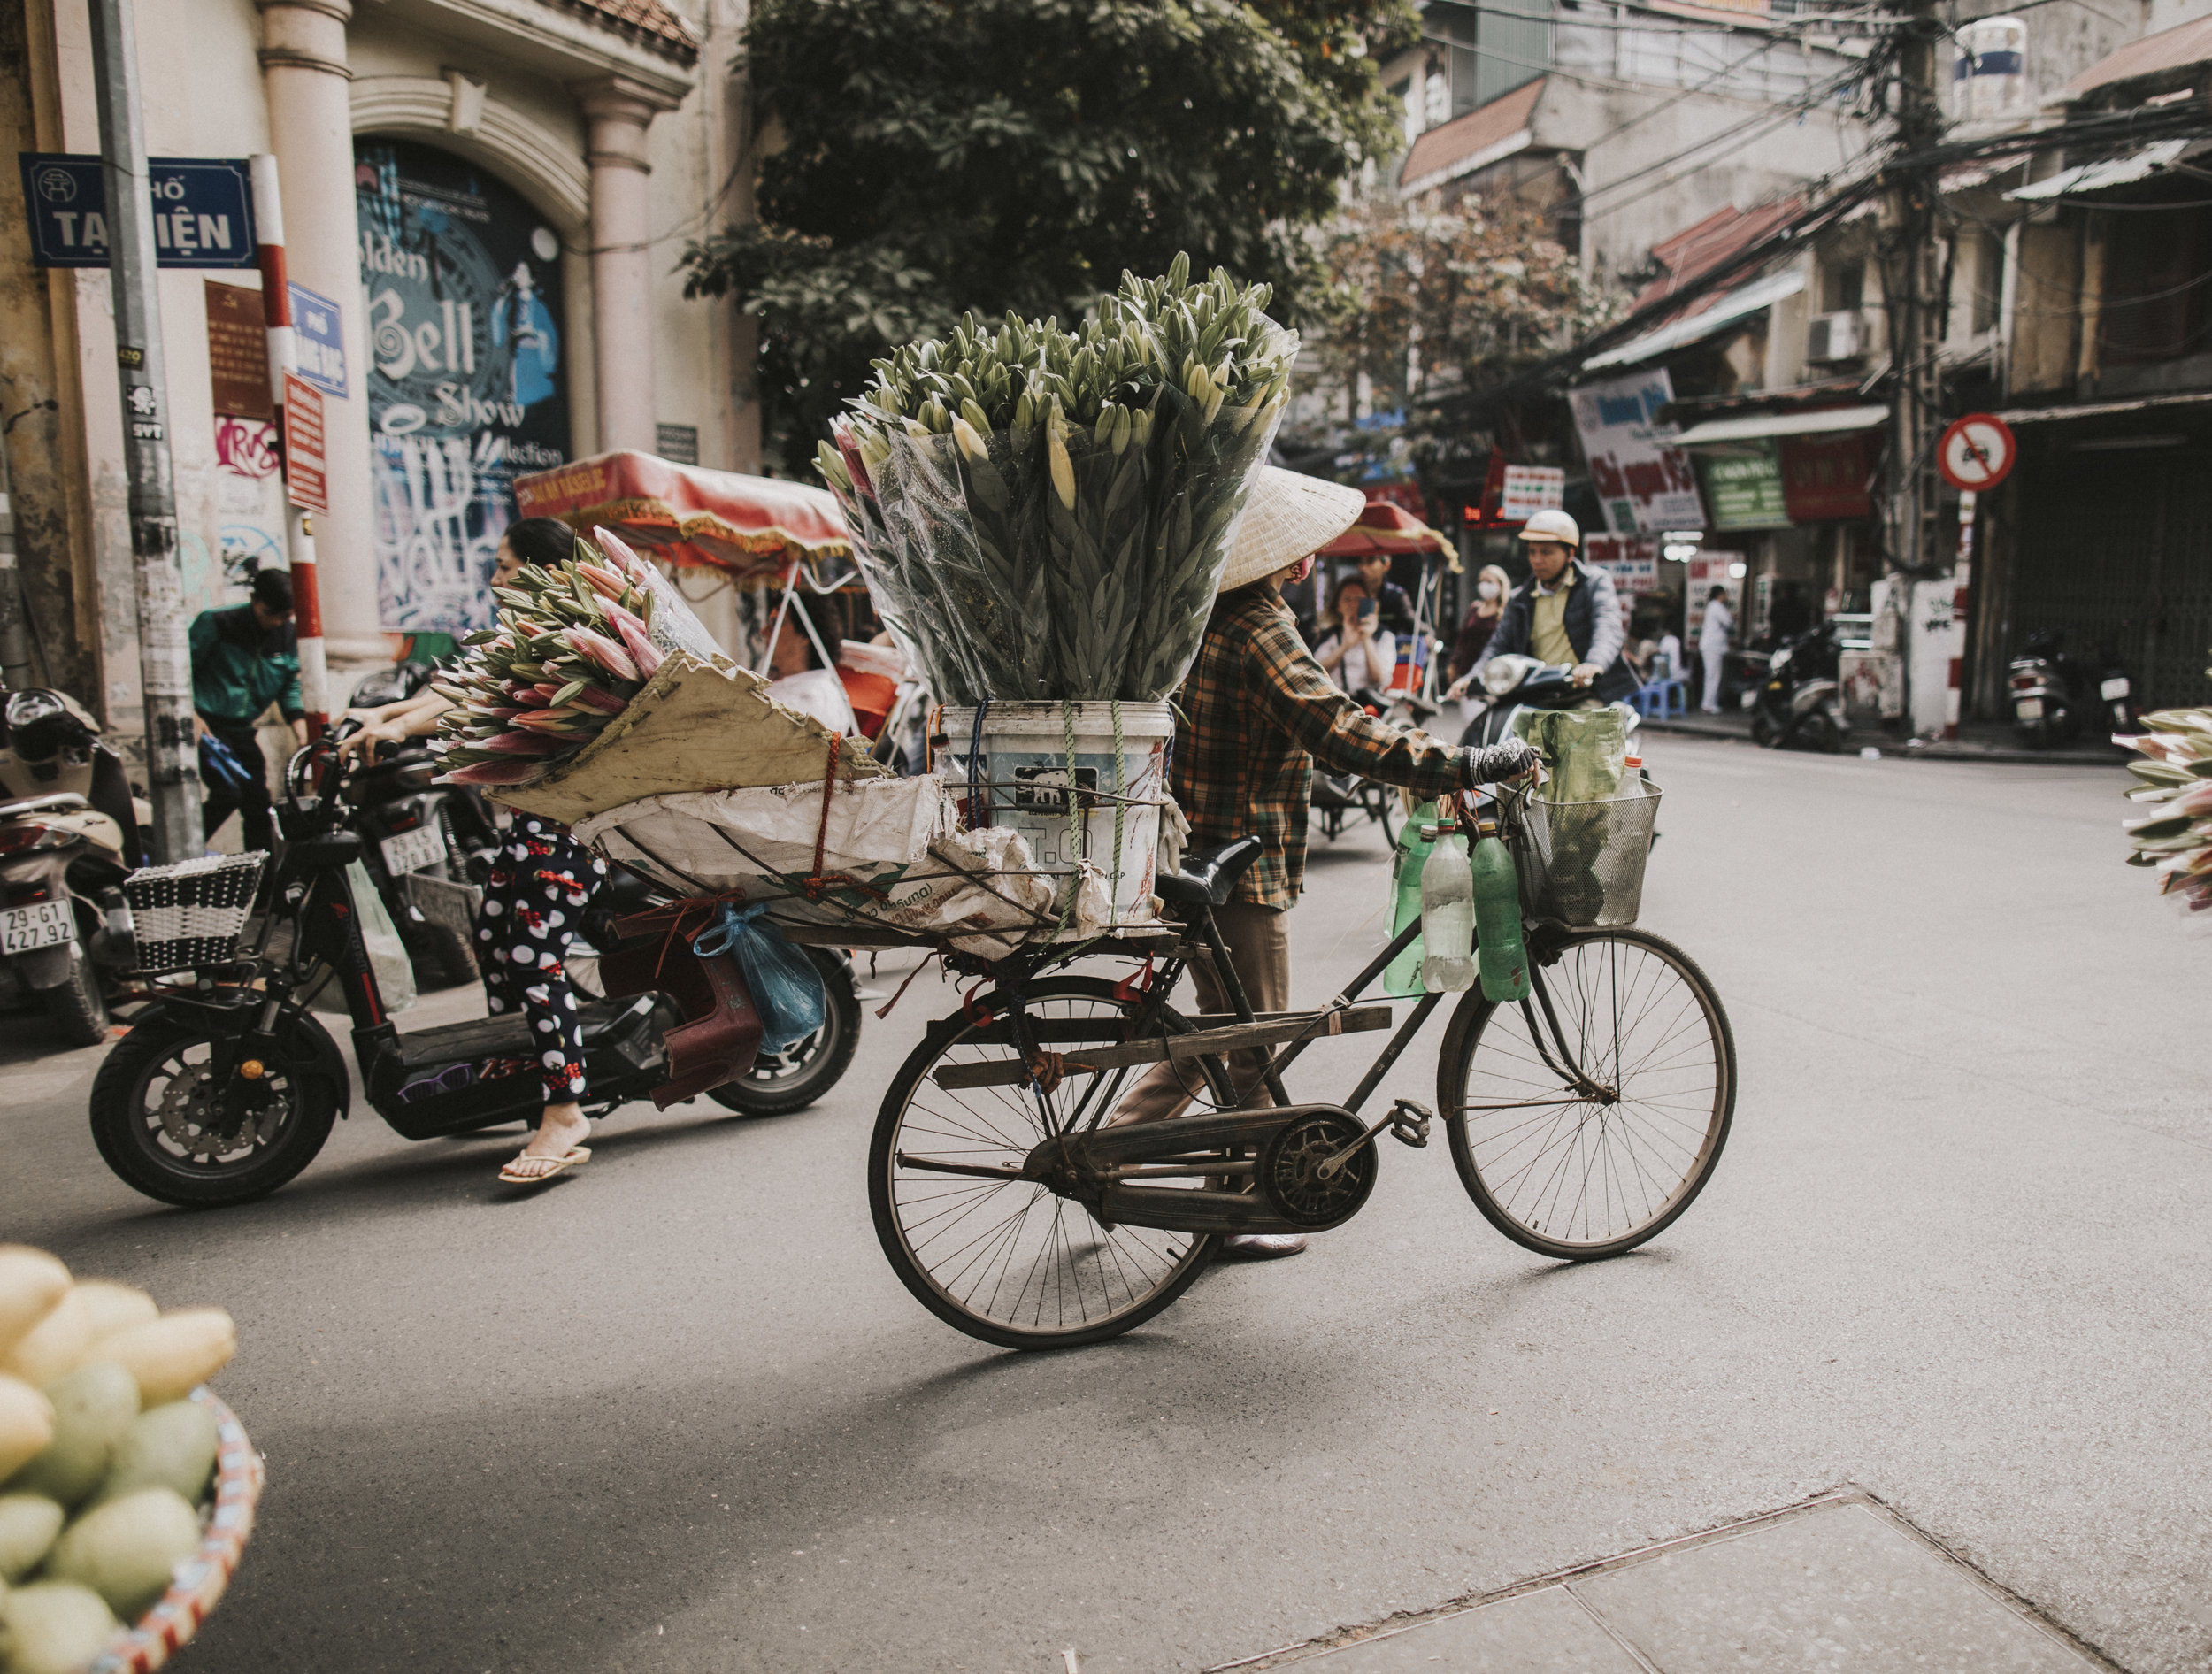 Travelling through Hanoi with flowers